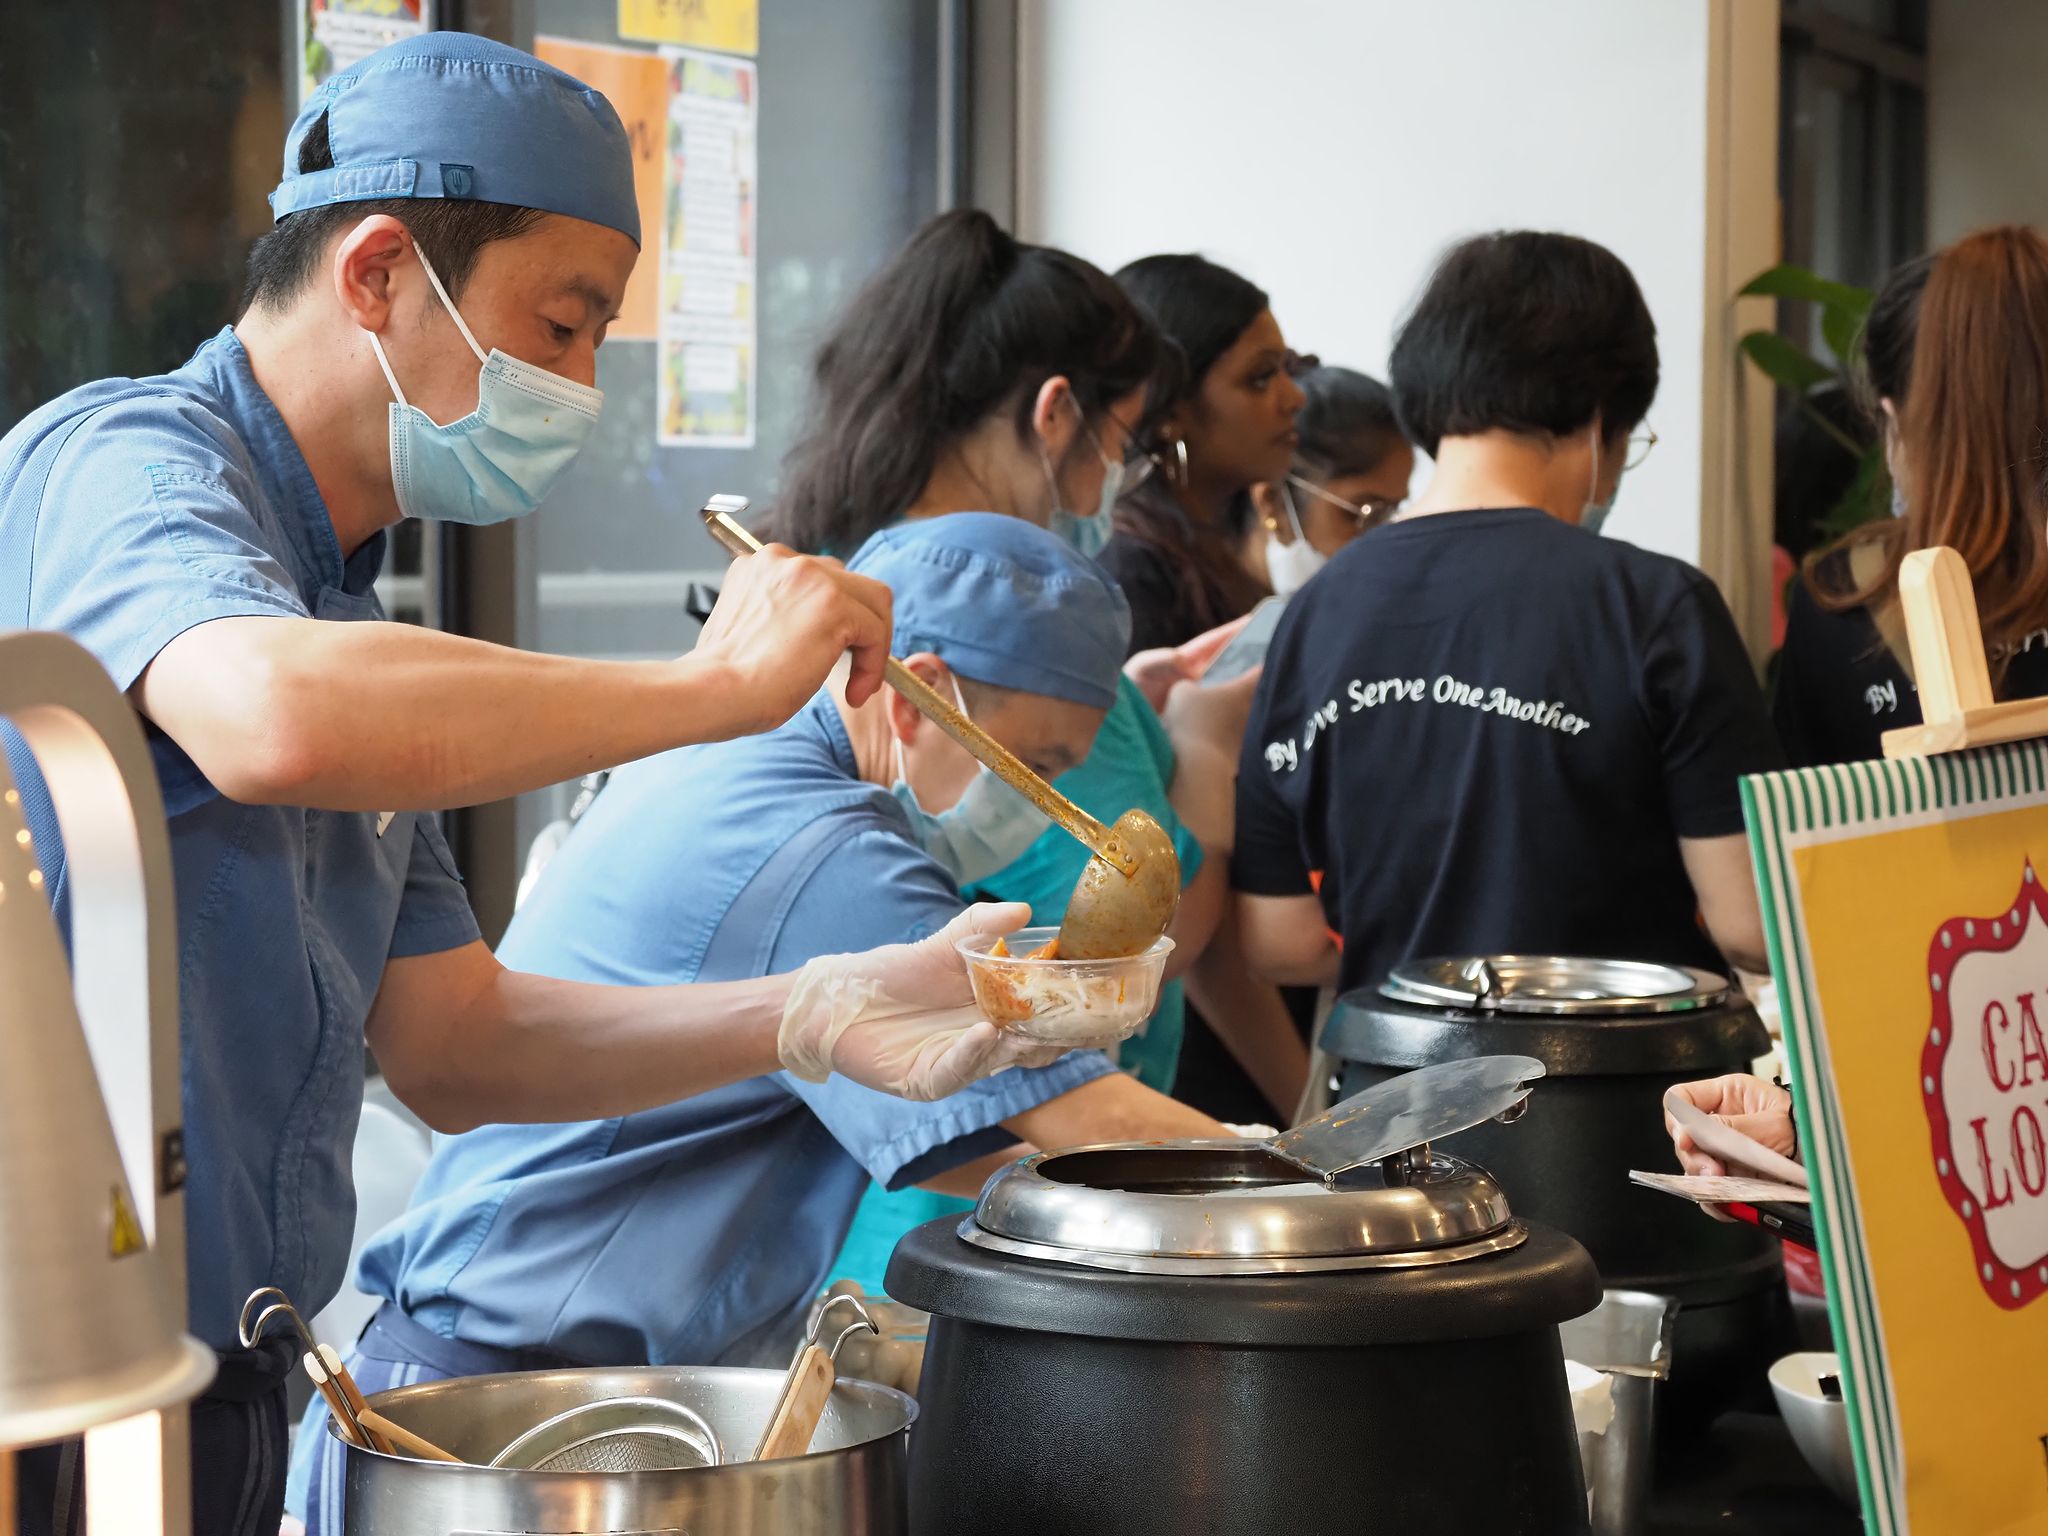 YWCA’s Fort Canning kitchen staff serving Laksa with Abalone